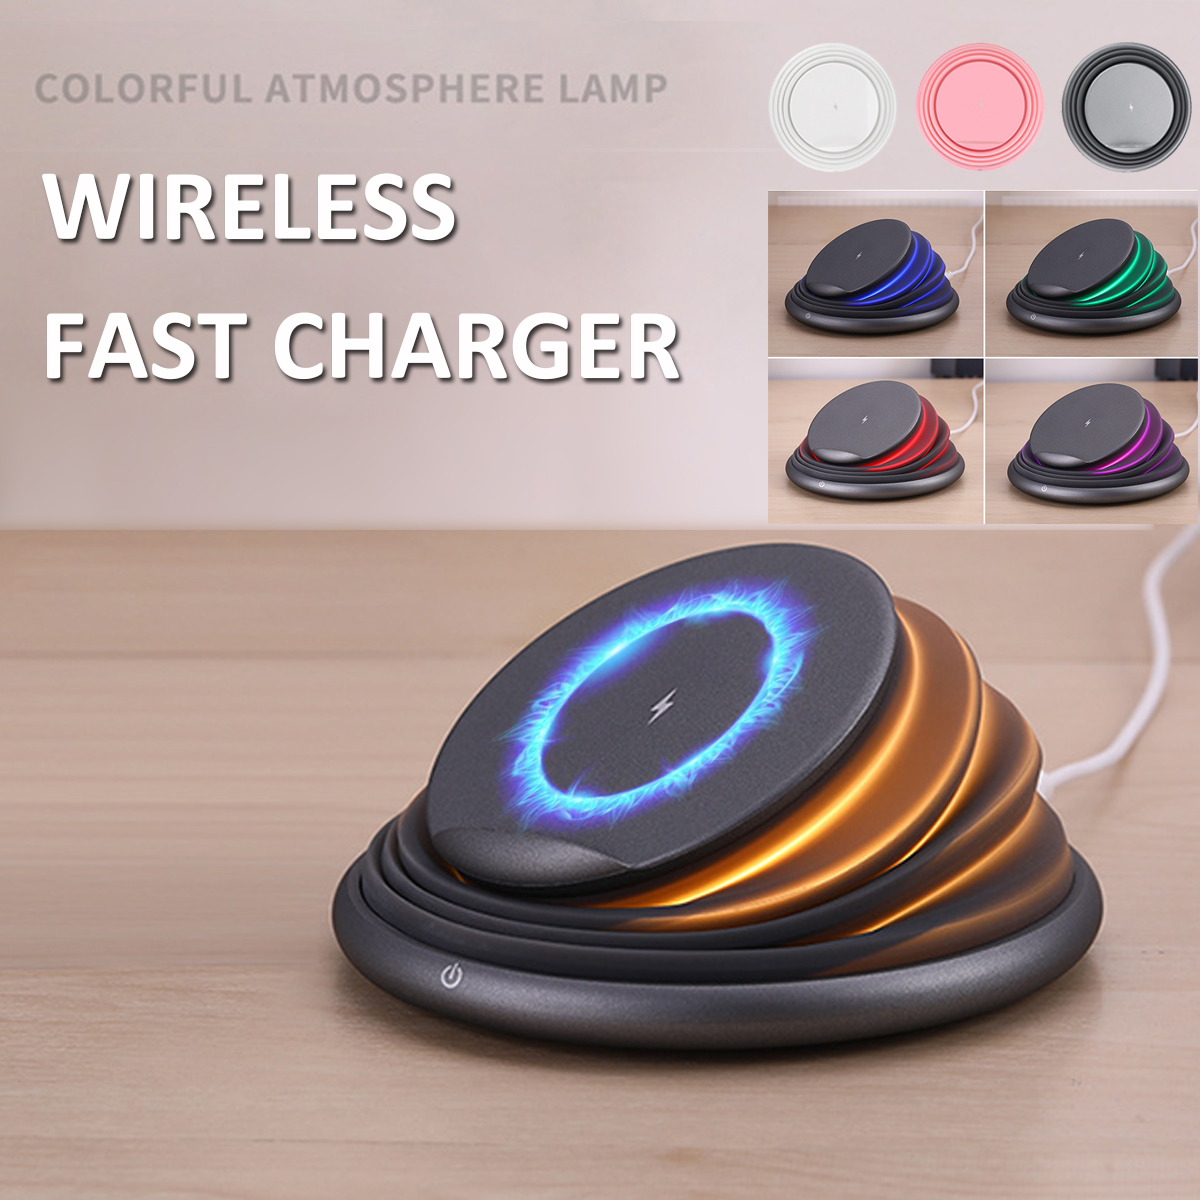 10W-9V-Wireless-Qi-Fast-Charger-Night-Light-Phone-Charging-Pad-For-Samsung-S8-S9-Note-8-1356503-2